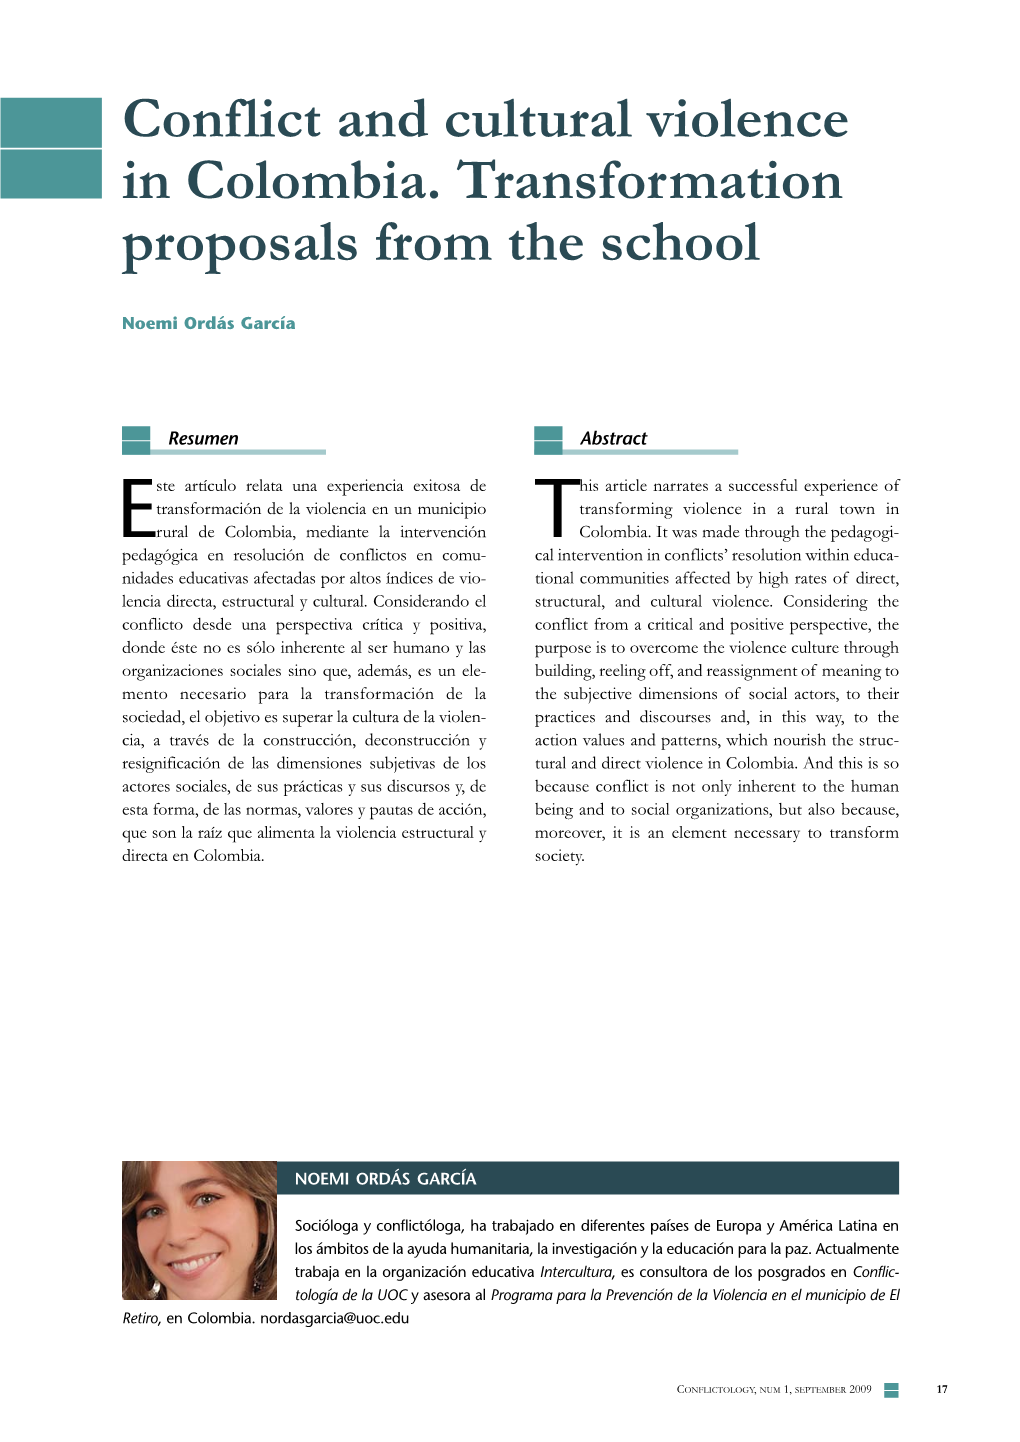 Conflict and Cultural Violence in Colombia. Transformation Proposals from the School